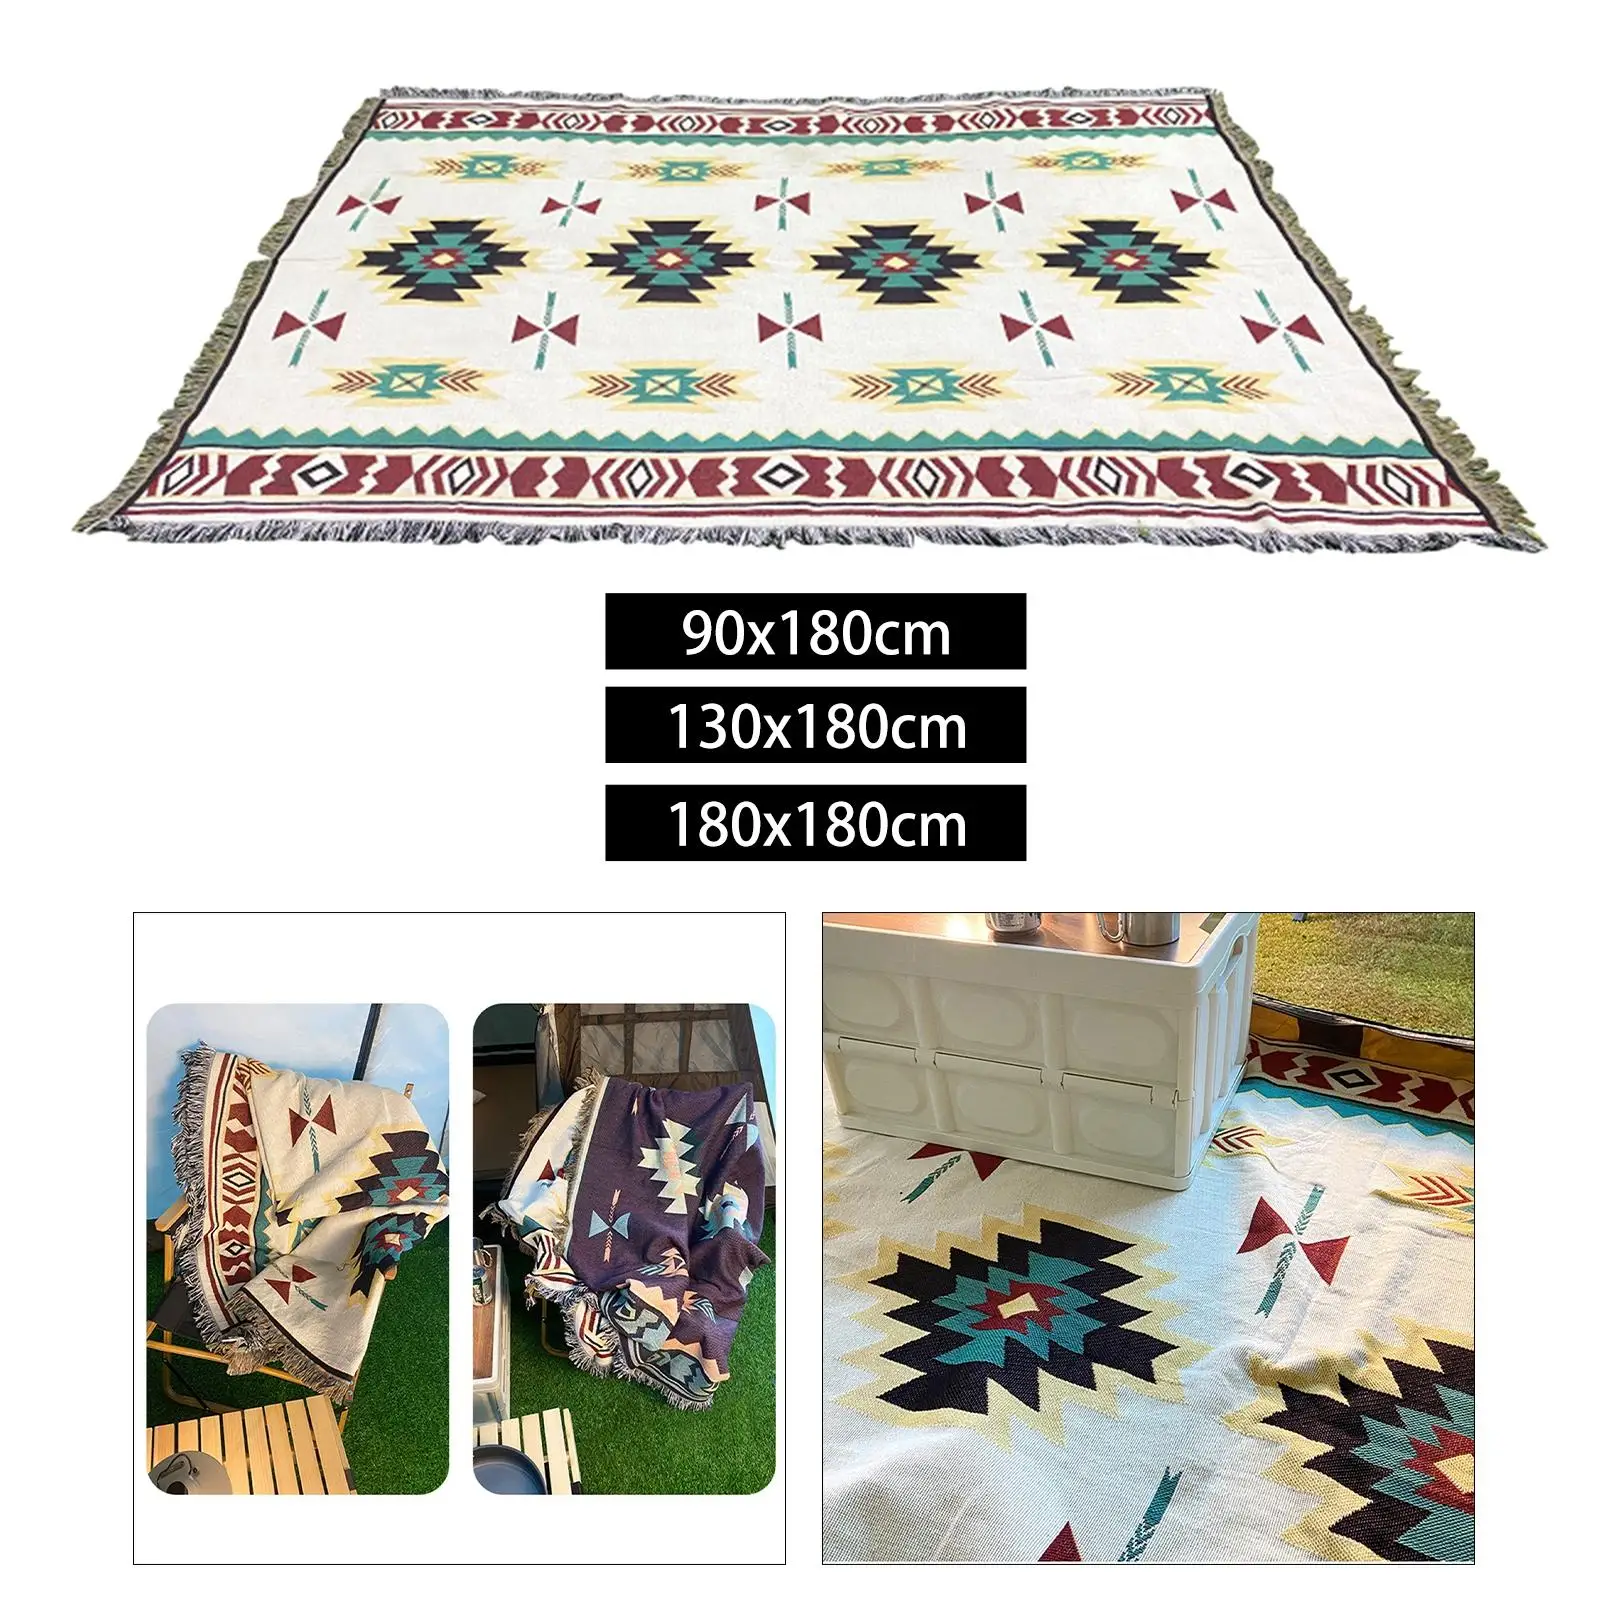 Picnic mat Blanket Breathable Casual Carpet for Outdoor Picnic, Indoor,